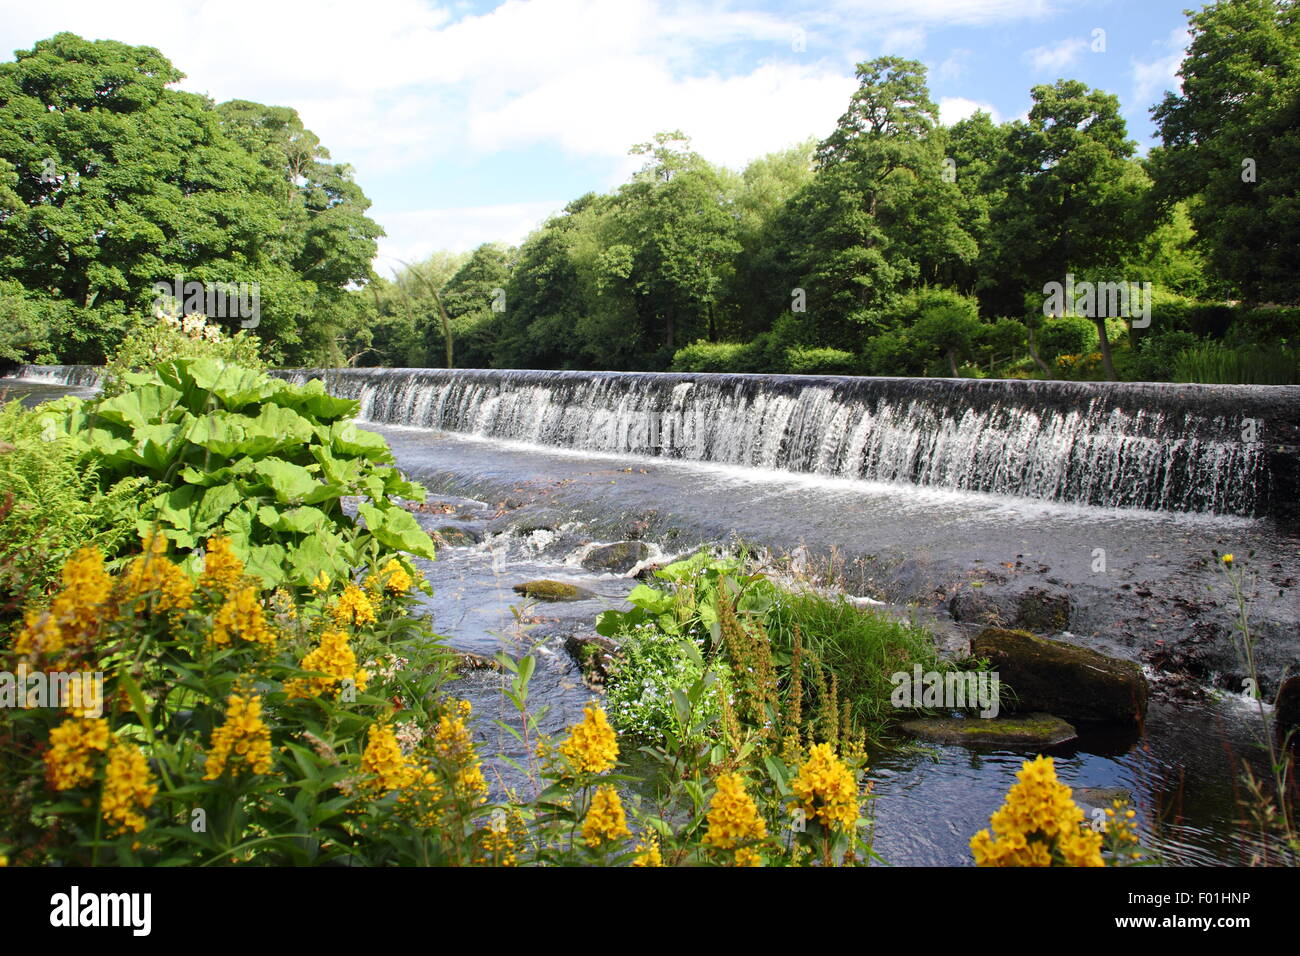 The weir on the River Derwent at Bamford in the Peak District National Park, Derbyshire England UK Stock Photo